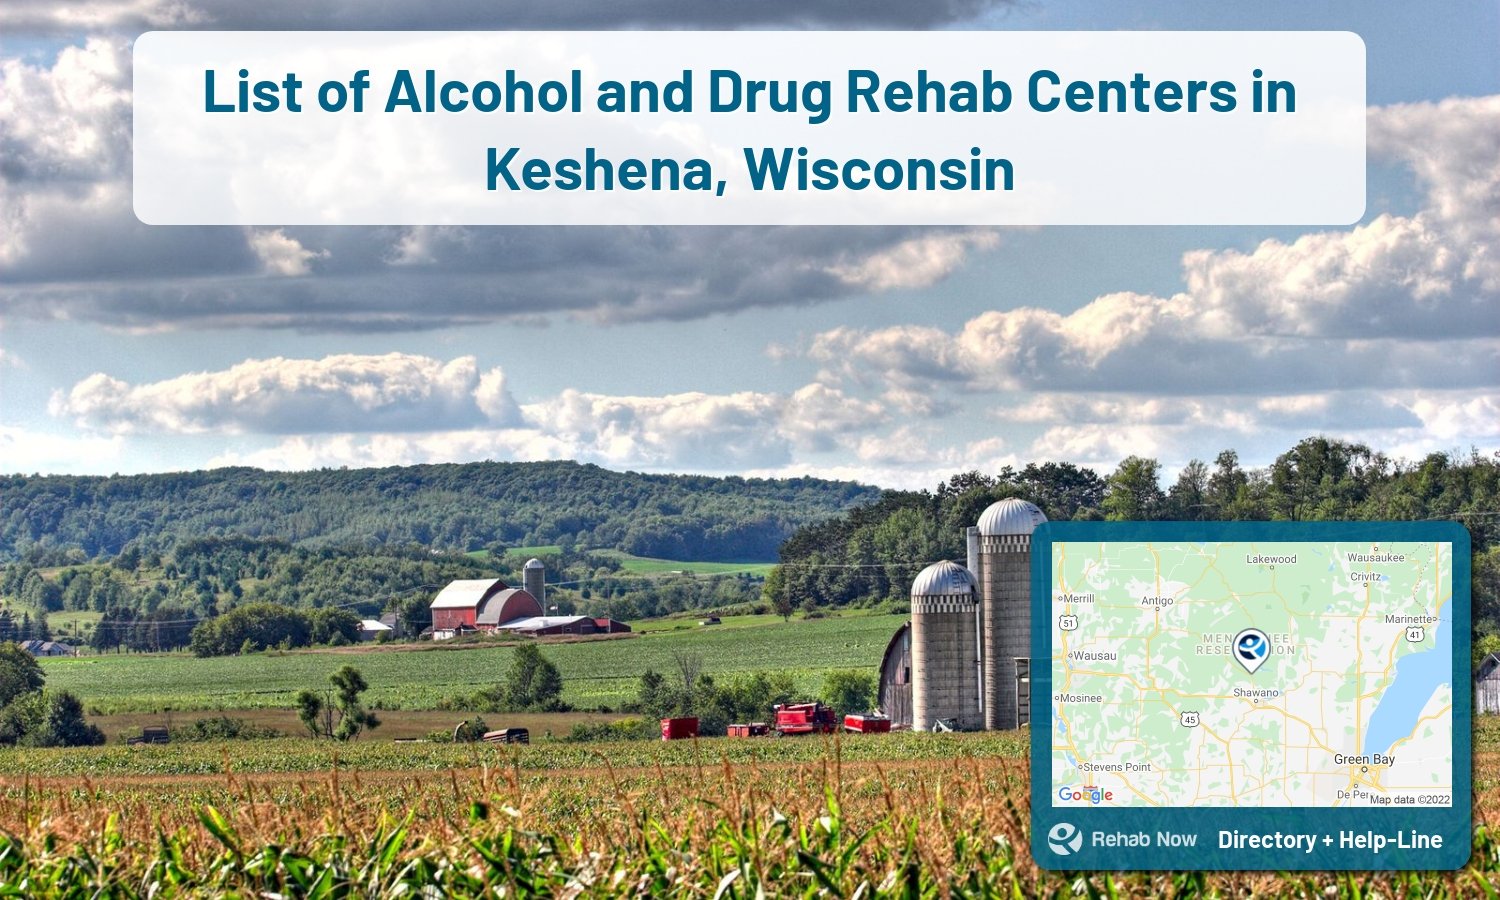 Keshena, WI Treatment Centers. Find drug rehab in Keshena, Wisconsin, or detox and treatment programs. Get the right help now!